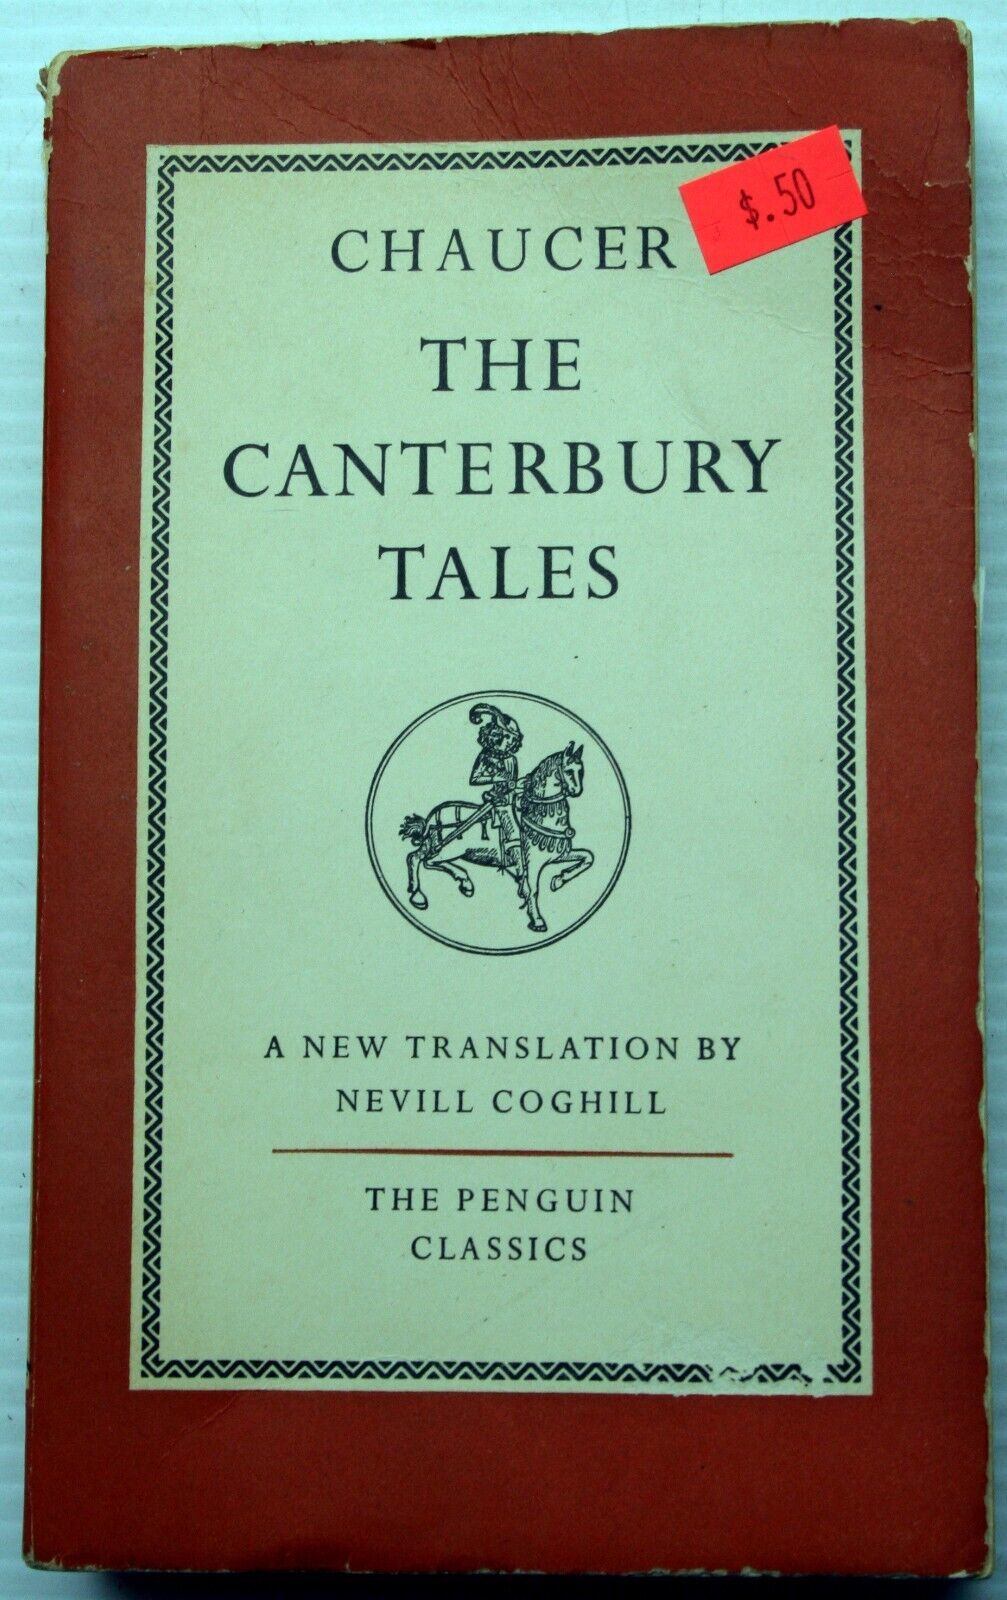 Primary image for vntg Geoffrey Chaucer 1952 Penguin Classic THE CANTERBURY TALES medieval tales